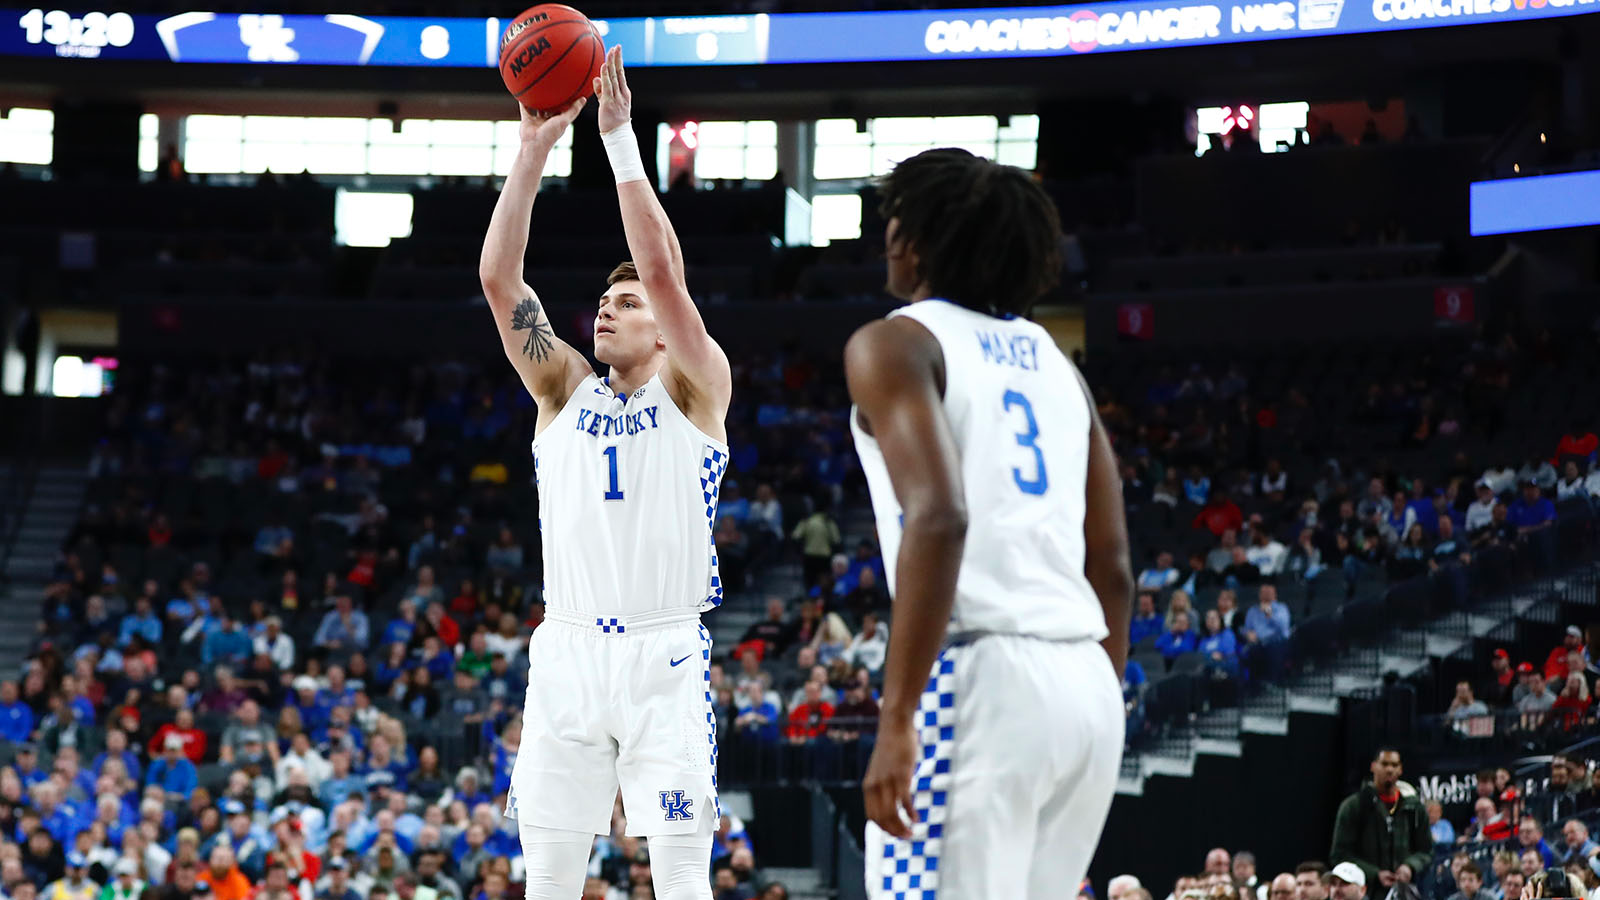 Cats Come Up Just Short, Fall to Ohio State